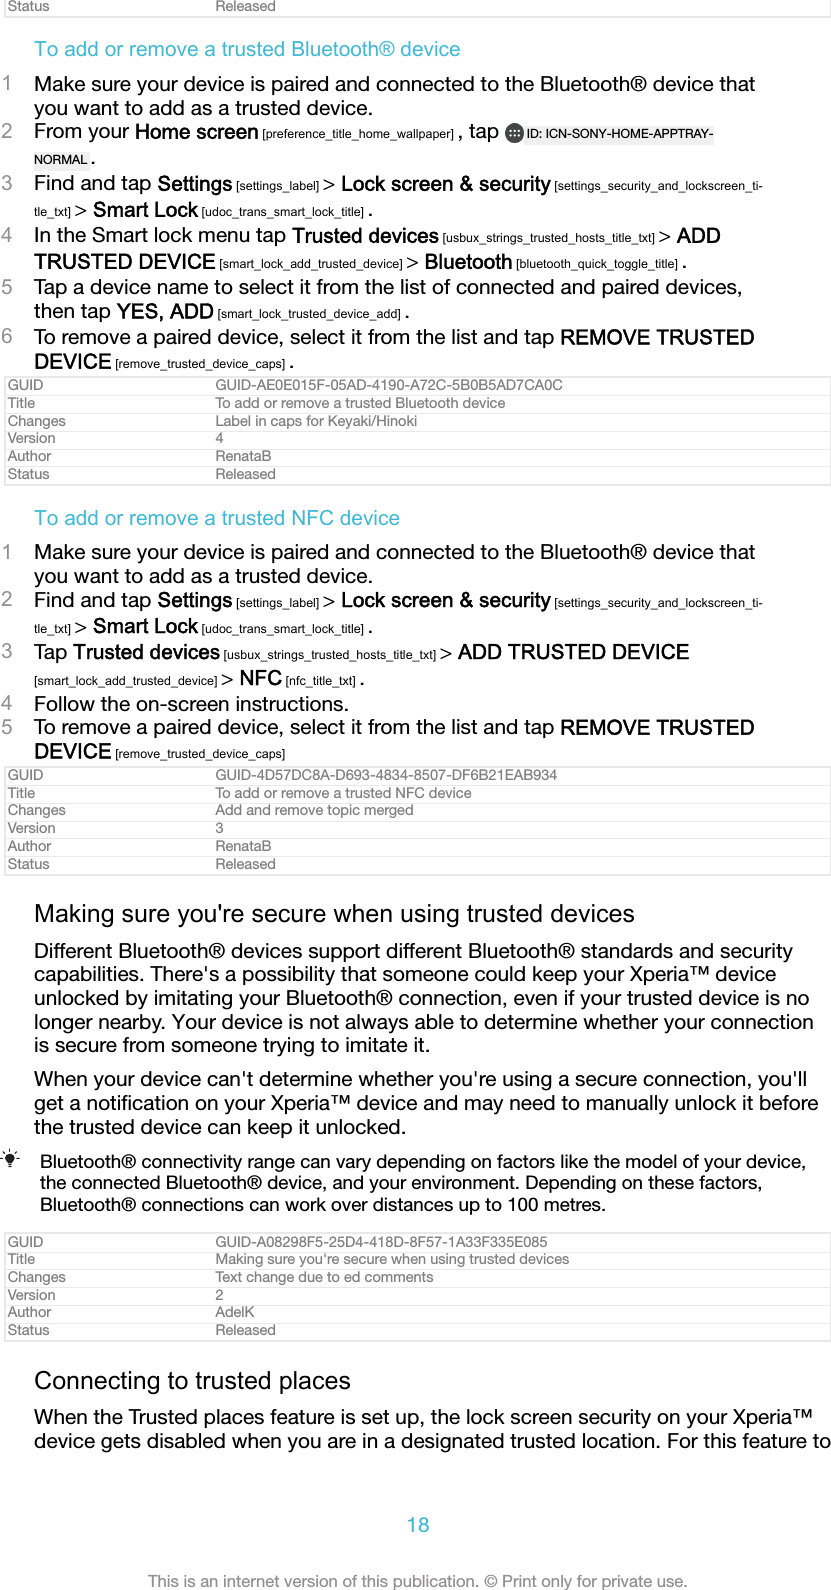 Status ReleasedTo add or remove a trusted Bluetooth® device1Make sure your device is paired and connected to the Bluetooth® device thatyou want to add as a trusted device.2From your Home screen [preference_title_home_wallpaper] , tap  ID: ICN-SONY-HOME-APPTRAY-NORMAL .3Find and tap Settings [settings_label] &gt; Lock screen &amp; security [settings_security_and_lockscreen_ti-tle_txt] &gt; Smart Lock [udoc_trans_smart_lock_title] .4In the Smart lock menu tap Trusted devices [usbux_strings_trusted_hosts_title_txt] &gt; ADDTRUSTED DEVICE [smart_lock_add_trusted_device] &gt; Bluetooth [bluetooth_quick_toggle_title] .5Tap a device name to select it from the list of connected and paired devices,then tap YES, ADD [smart_lock_trusted_device_add] .6To remove a paired device, select it from the list and tap REMOVE TRUSTEDDEVICE [remove_trusted_device_caps] .GUID GUID-AE0E015F-05AD-4190-A72C-5B0B5AD7CA0CTitle To add or remove a trusted Bluetooth deviceChanges Label in caps for Keyaki/HinokiVersion 4Author RenataBStatus ReleasedTo add or remove a trusted NFC device1Make sure your device is paired and connected to the Bluetooth® device thatyou want to add as a trusted device.2Find and tap Settings [settings_label] &gt; Lock screen &amp; security [settings_security_and_lockscreen_ti-tle_txt] &gt; Smart Lock [udoc_trans_smart_lock_title] .3Tap Trusted devices [usbux_strings_trusted_hosts_title_txt] &gt; ADD TRUSTED DEVICE[smart_lock_add_trusted_device] &gt; NFC [nfc_title_txt] .4Follow the on-screen instructions.5To remove a paired device, select it from the list and tap REMOVE TRUSTEDDEVICE [remove_trusted_device_caps]GUID GUID-4D57DC8A-D693-4834-8507-DF6B21EAB934Title To add or remove a trusted NFC deviceChanges Add and remove topic mergedVersion 3Author RenataBStatus ReleasedMaking sure you&apos;re secure when using trusted devicesDifferent Bluetooth® devices support different Bluetooth® standards and securitycapabilities. There&apos;s a possibility that someone could keep your Xperia™ deviceunlocked by imitating your Bluetooth® connection, even if your trusted device is nolonger nearby. Your device is not always able to determine whether your connectionis secure from someone trying to imitate it.When your device can&apos;t determine whether you&apos;re using a secure connection, you&apos;llget a notiﬁcation on your Xperia™ device and may need to manually unlock it beforethe trusted device can keep it unlocked.Bluetooth® connectivity range can vary depending on factors like the model of your device,the connected Bluetooth® device, and your environment. Depending on these factors,Bluetooth® connections can work over distances up to 100 metres.GUID GUID-A08298F5-25D4-418D-8F57-1A33F335E085Title Making sure you&apos;re secure when using trusted devicesChanges Text change due to ed commentsVersion 2Author AdelKStatus ReleasedConnecting to trusted placesWhen the Trusted places feature is set up, the lock screen security on your Xperia™device gets disabled when you are in a designated trusted location. For this feature to18This is an internet version of this publication. © Print only for private use.